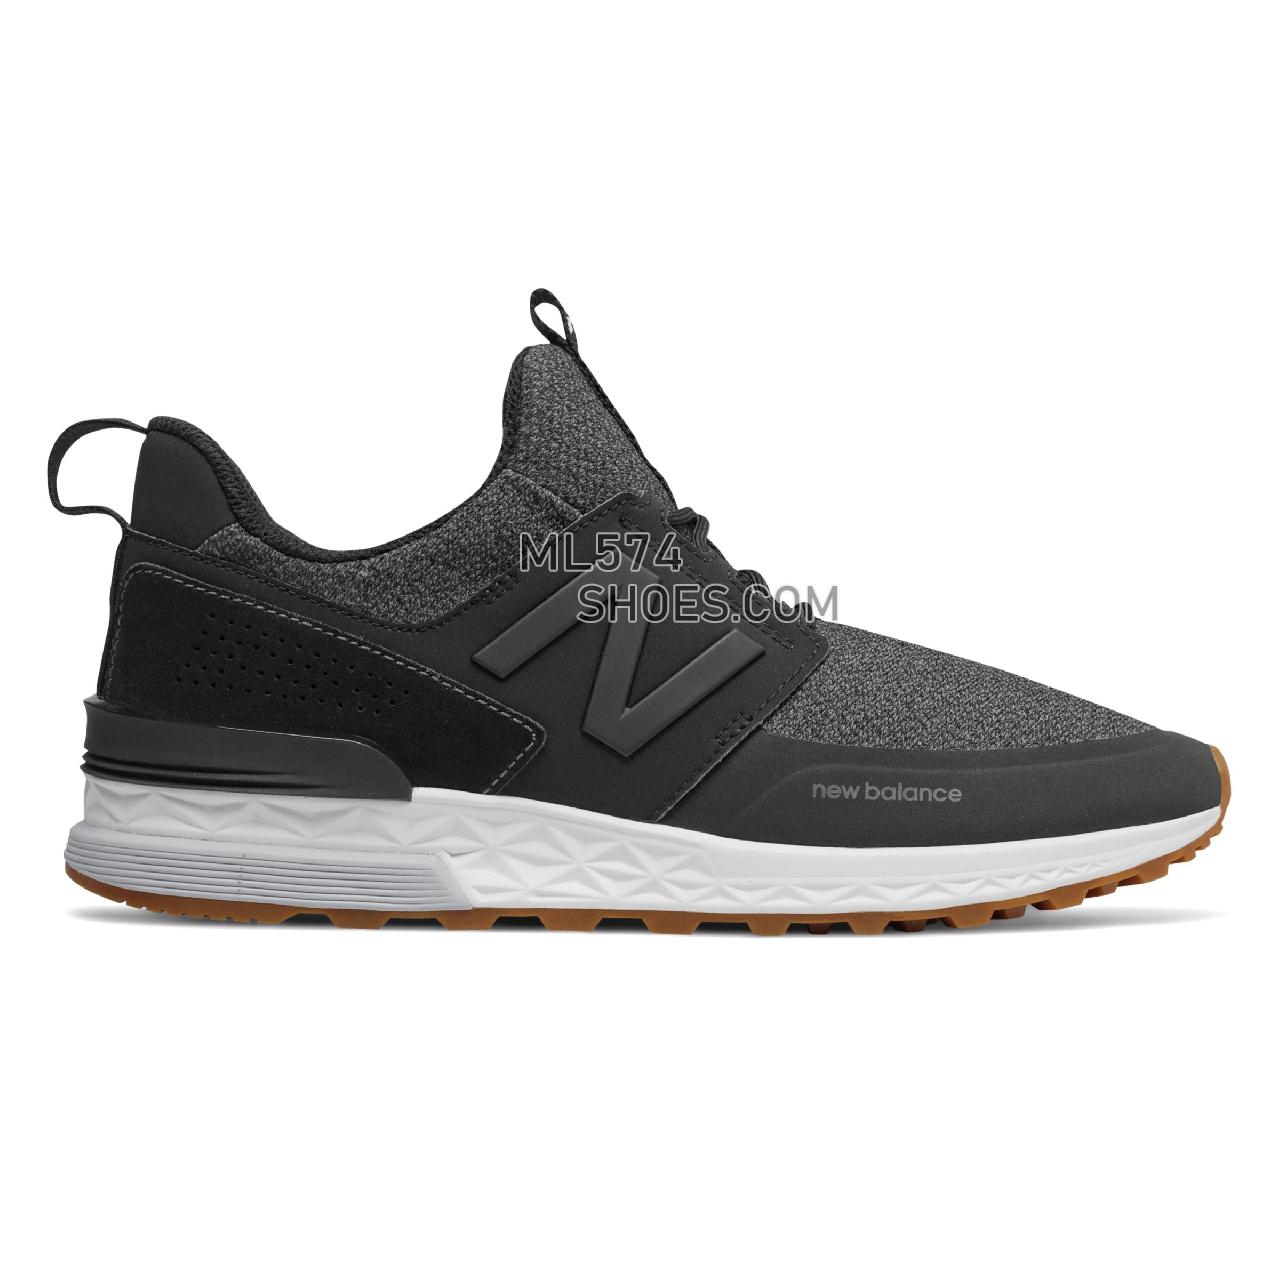 New Balance 574 Sport - Men's 574 - Classic Black with Magnet - MS574DTB